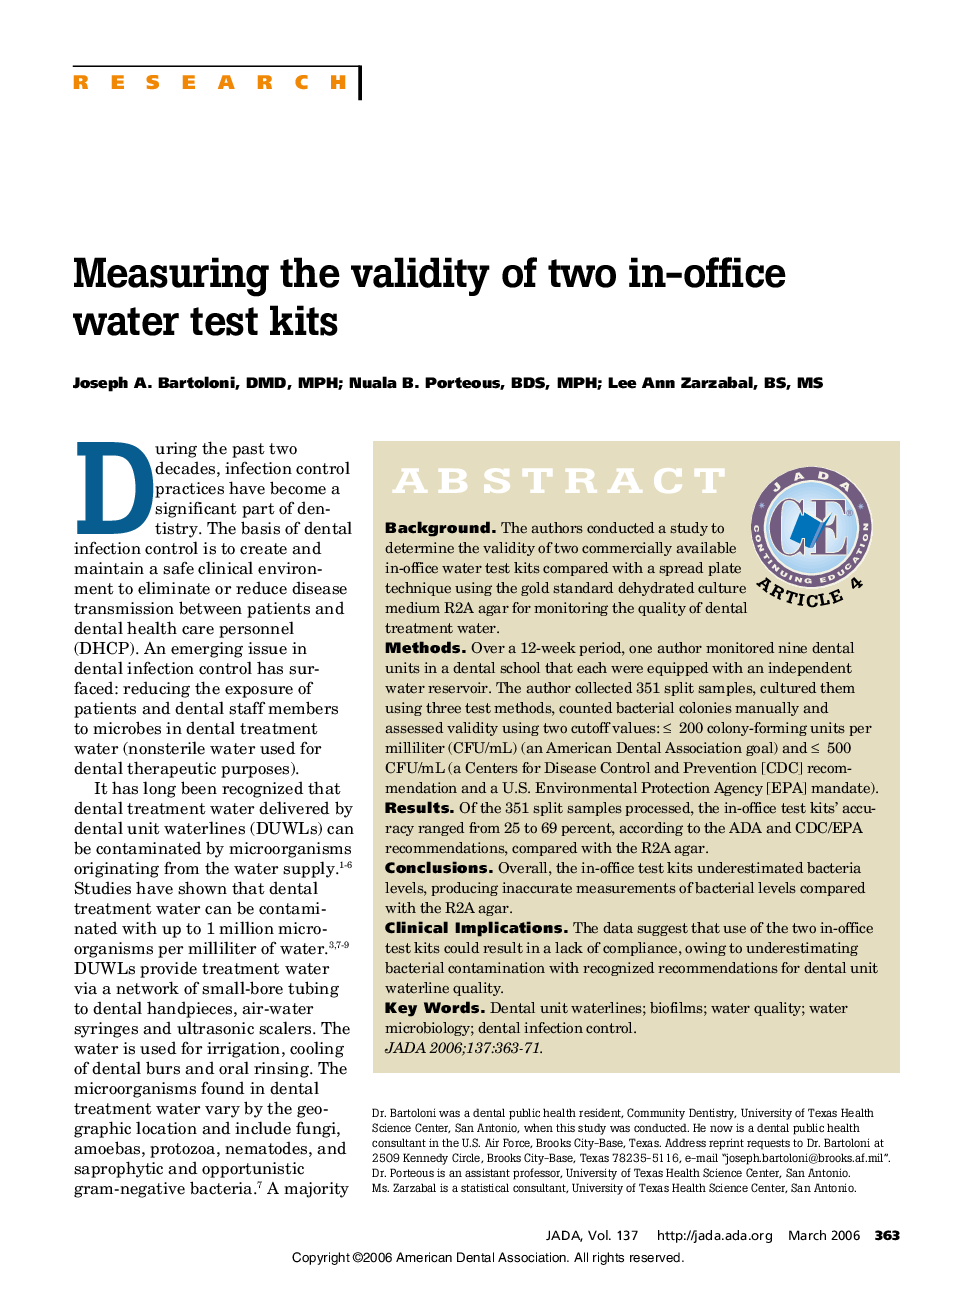 Measuring the validity of two in-office water test kits